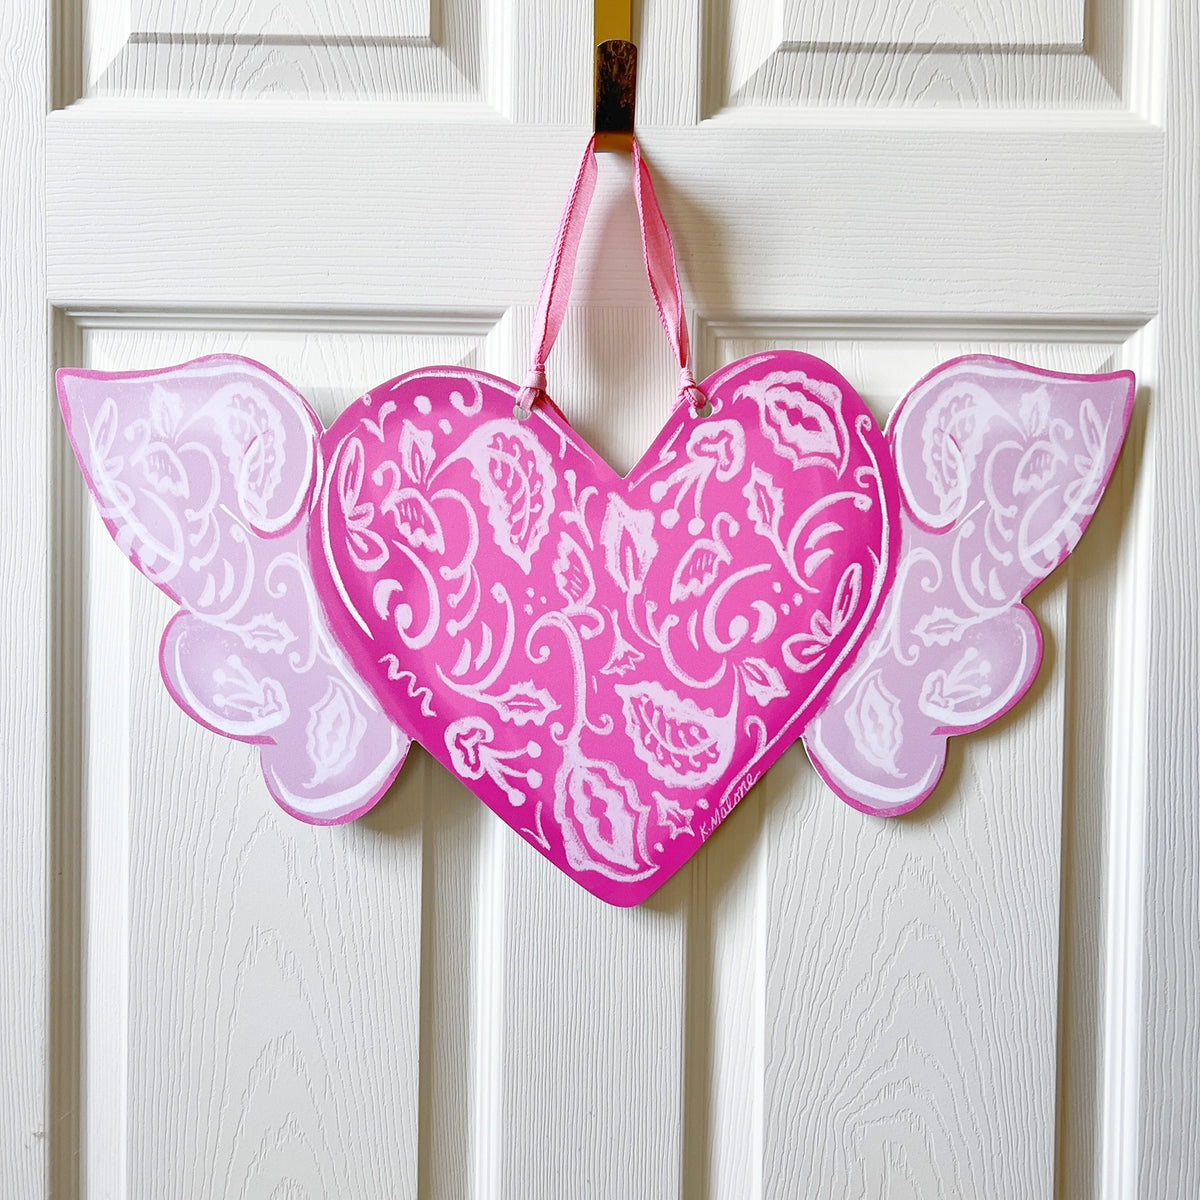 Handcrafted Beauty: Carved and Painted Wooden Heart Decor – GLORY HAUS